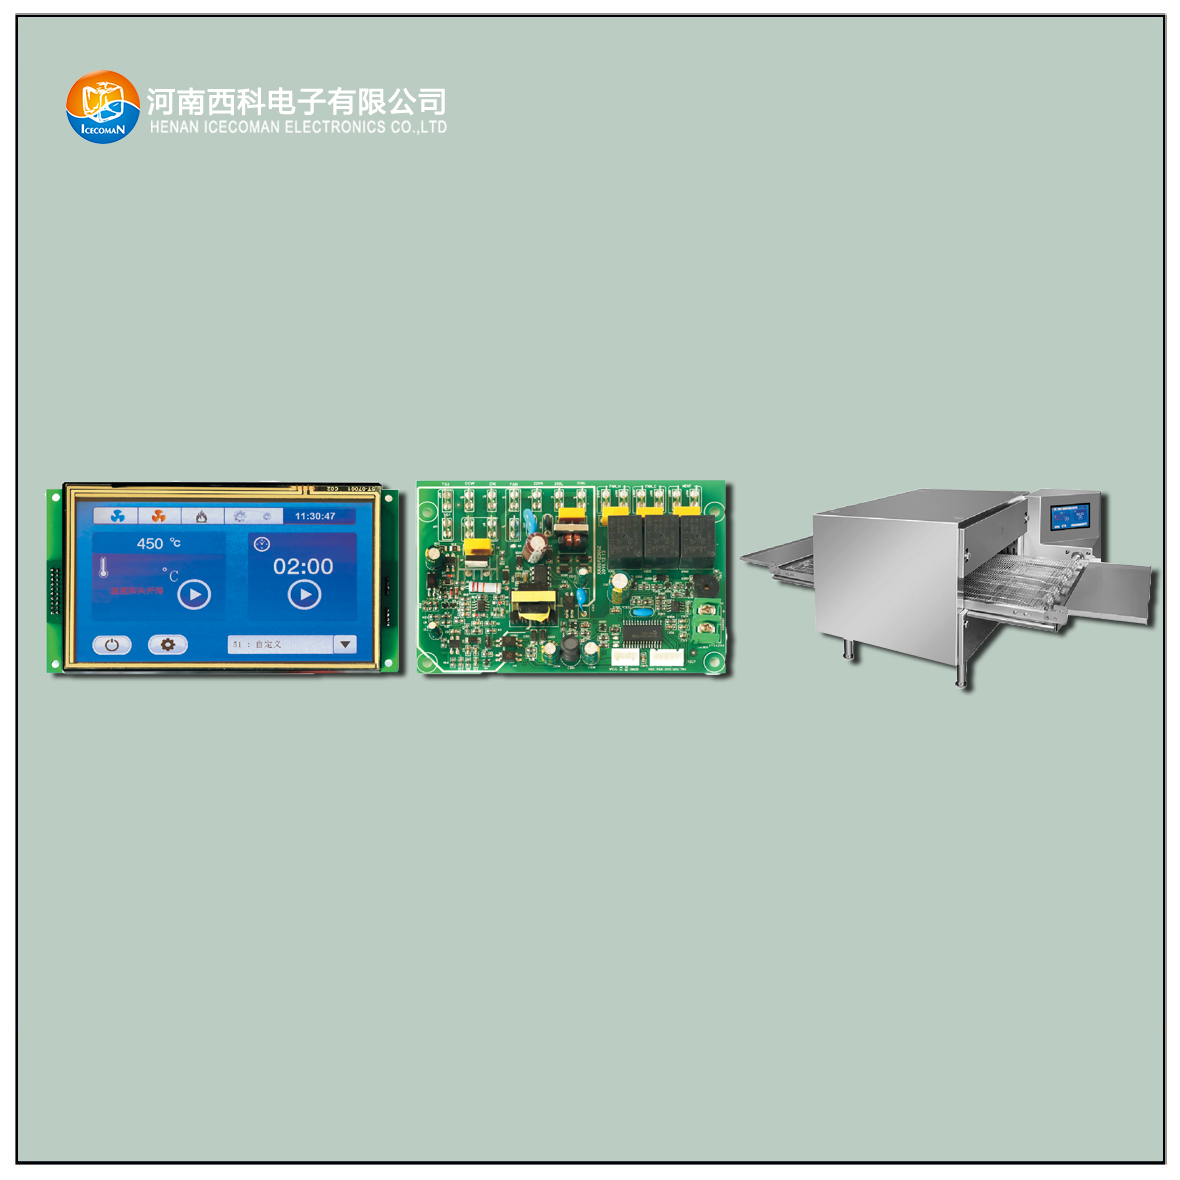 Psl-tft-b chain pizza oven controller